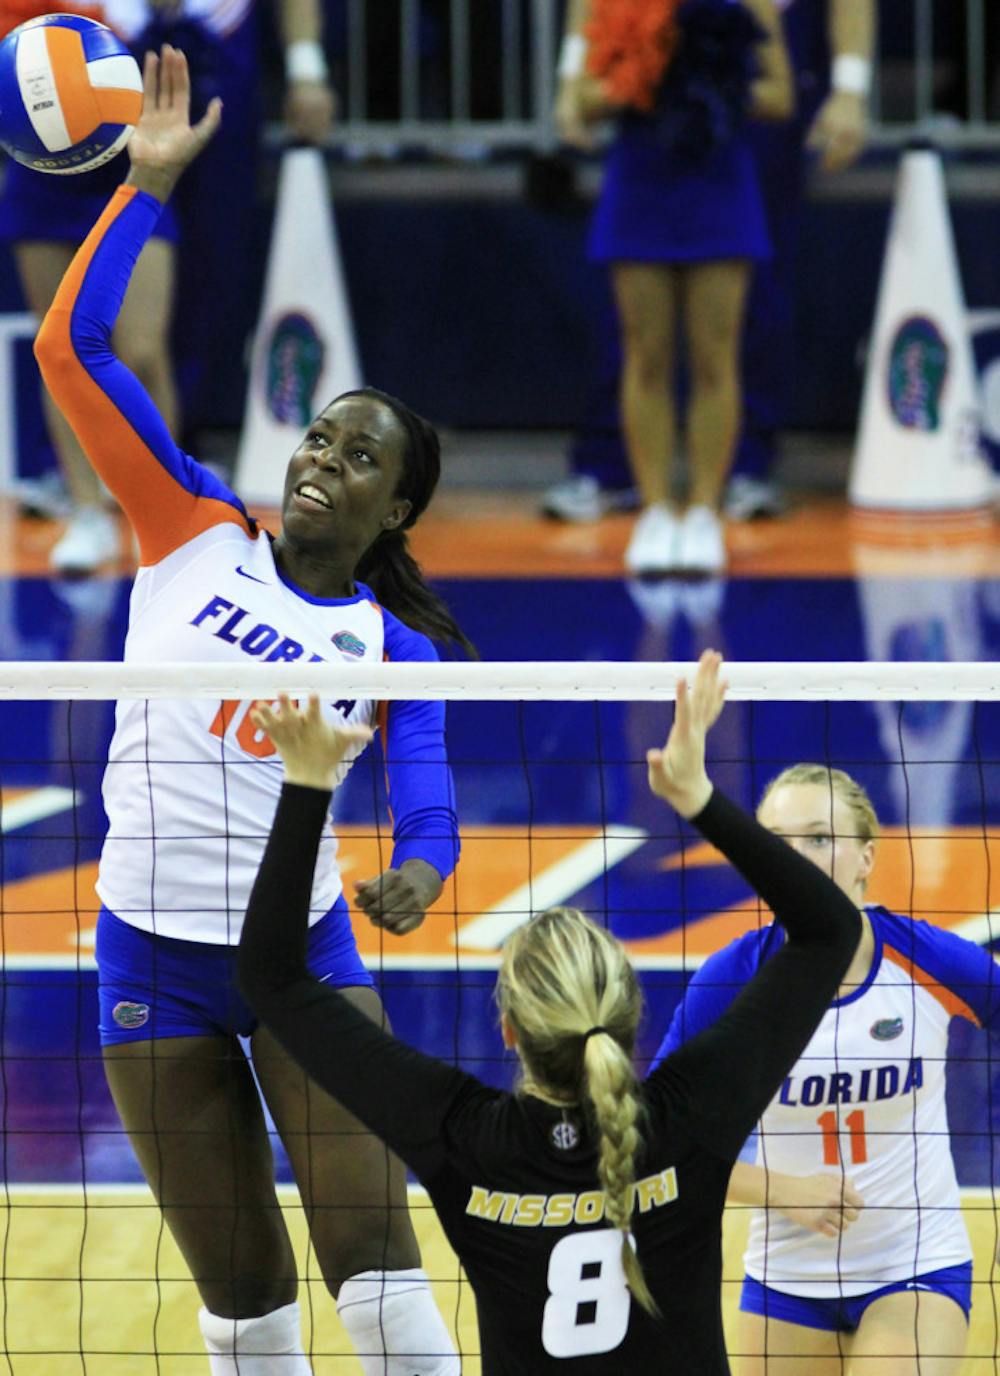 <p>Chloe Mann (10) spikes the ball over Missouri’s Whitney Little (8) during UF’s 3-0 win on Sept. 21, 2012, in the Stephen C. O’Connell Center.</p>